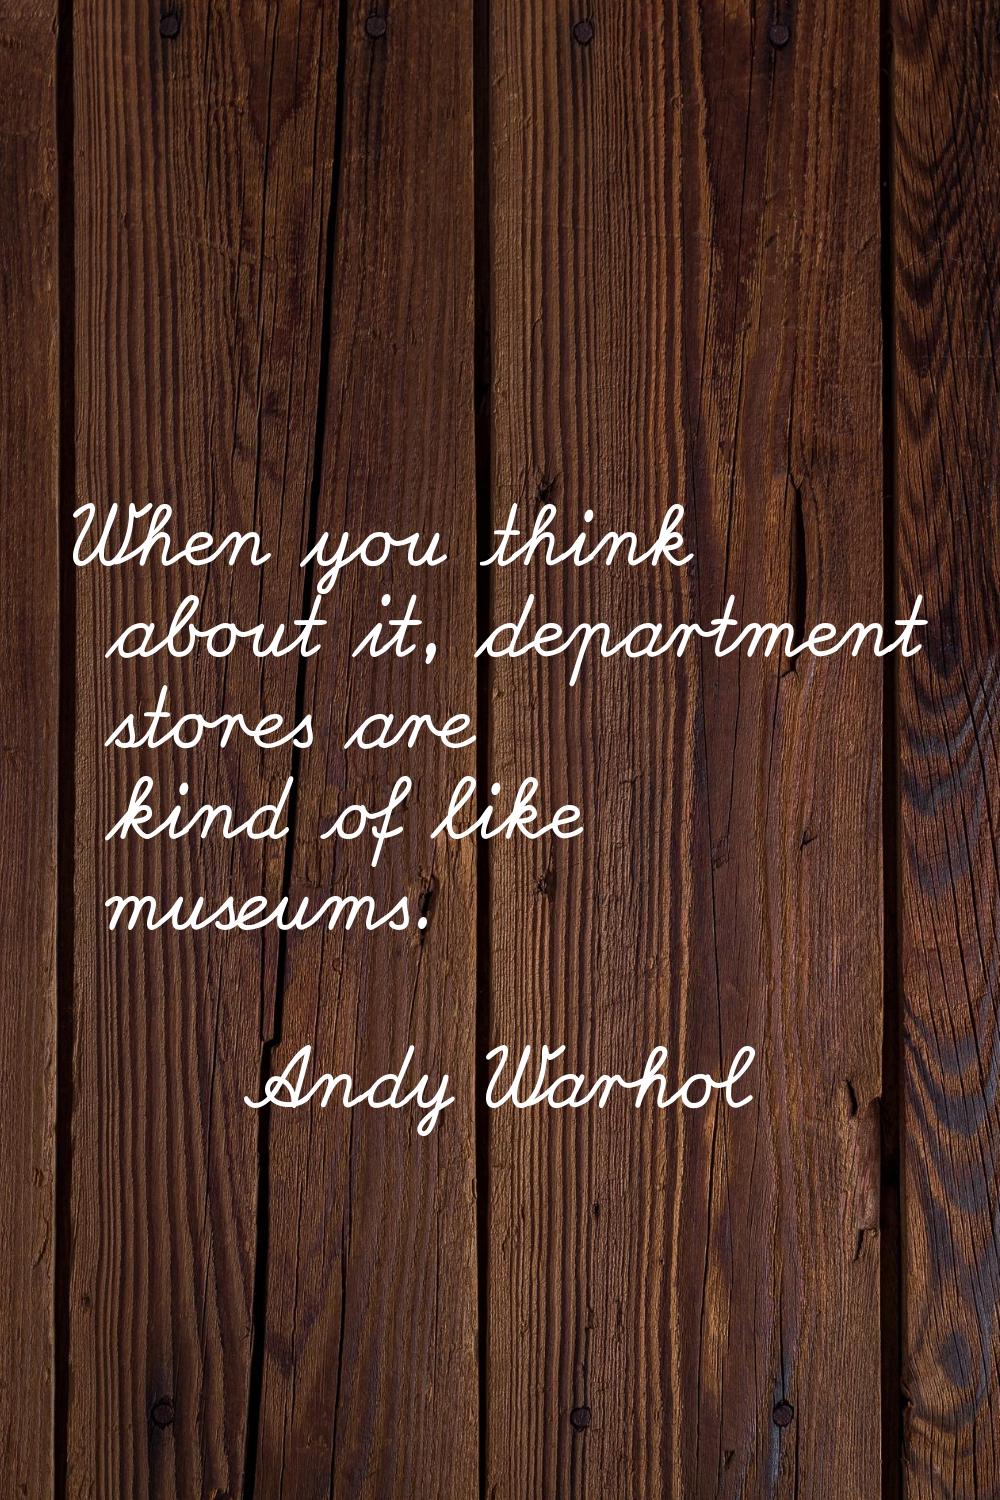 When you think about it, department stores are kind of like museums.